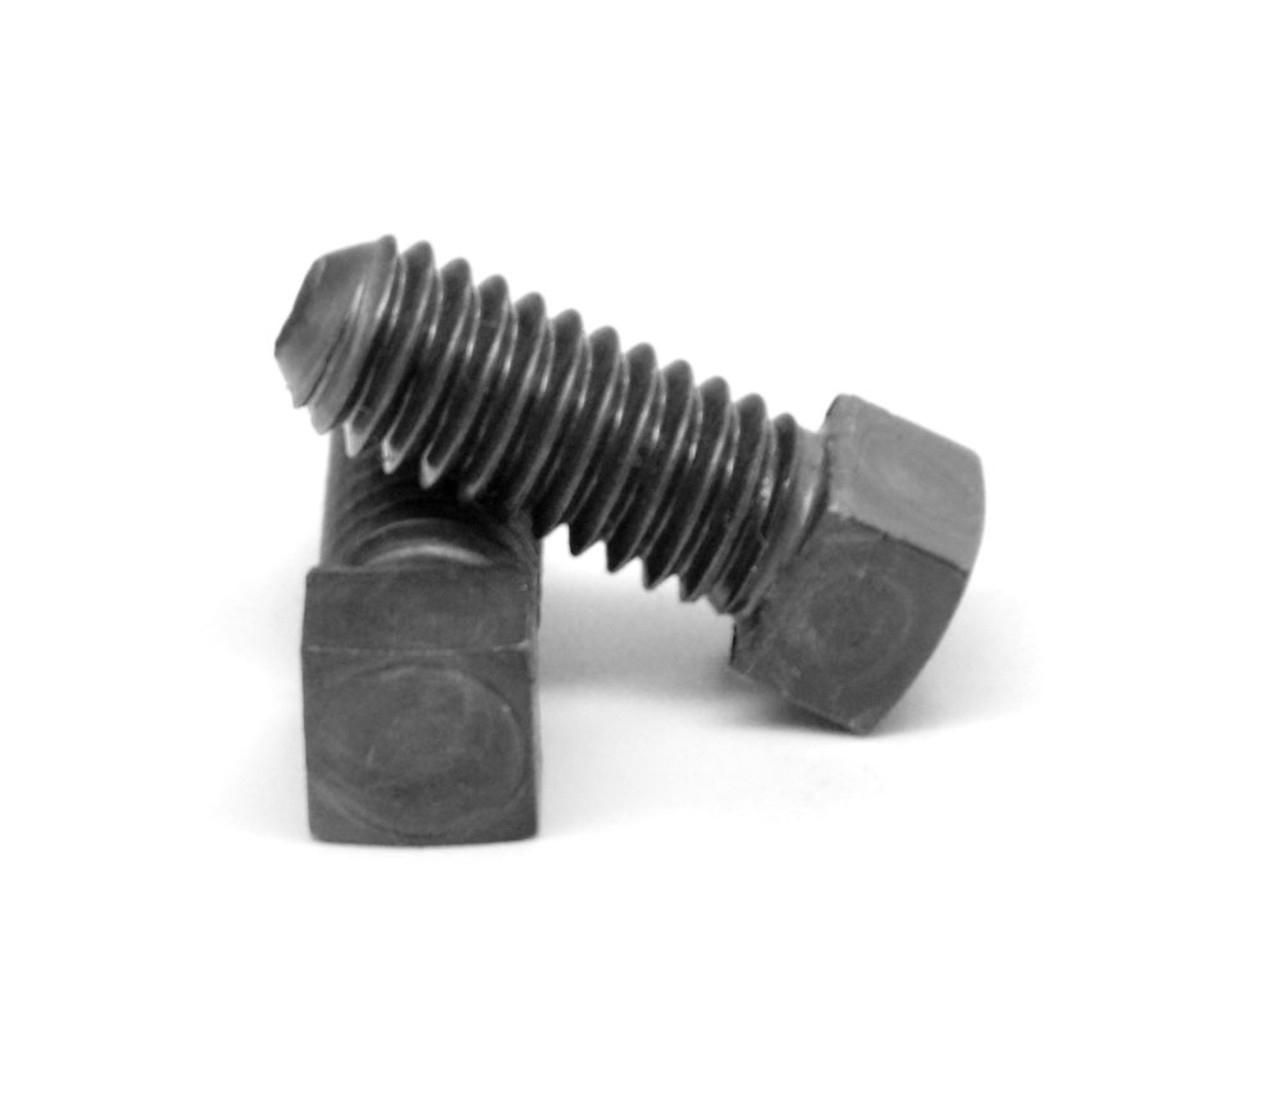 1/2"-13 x 9" (FT) Coarse Thread Square Head Set Screw Cup Point Low Carbon Steel Case Hardened Plain Finish